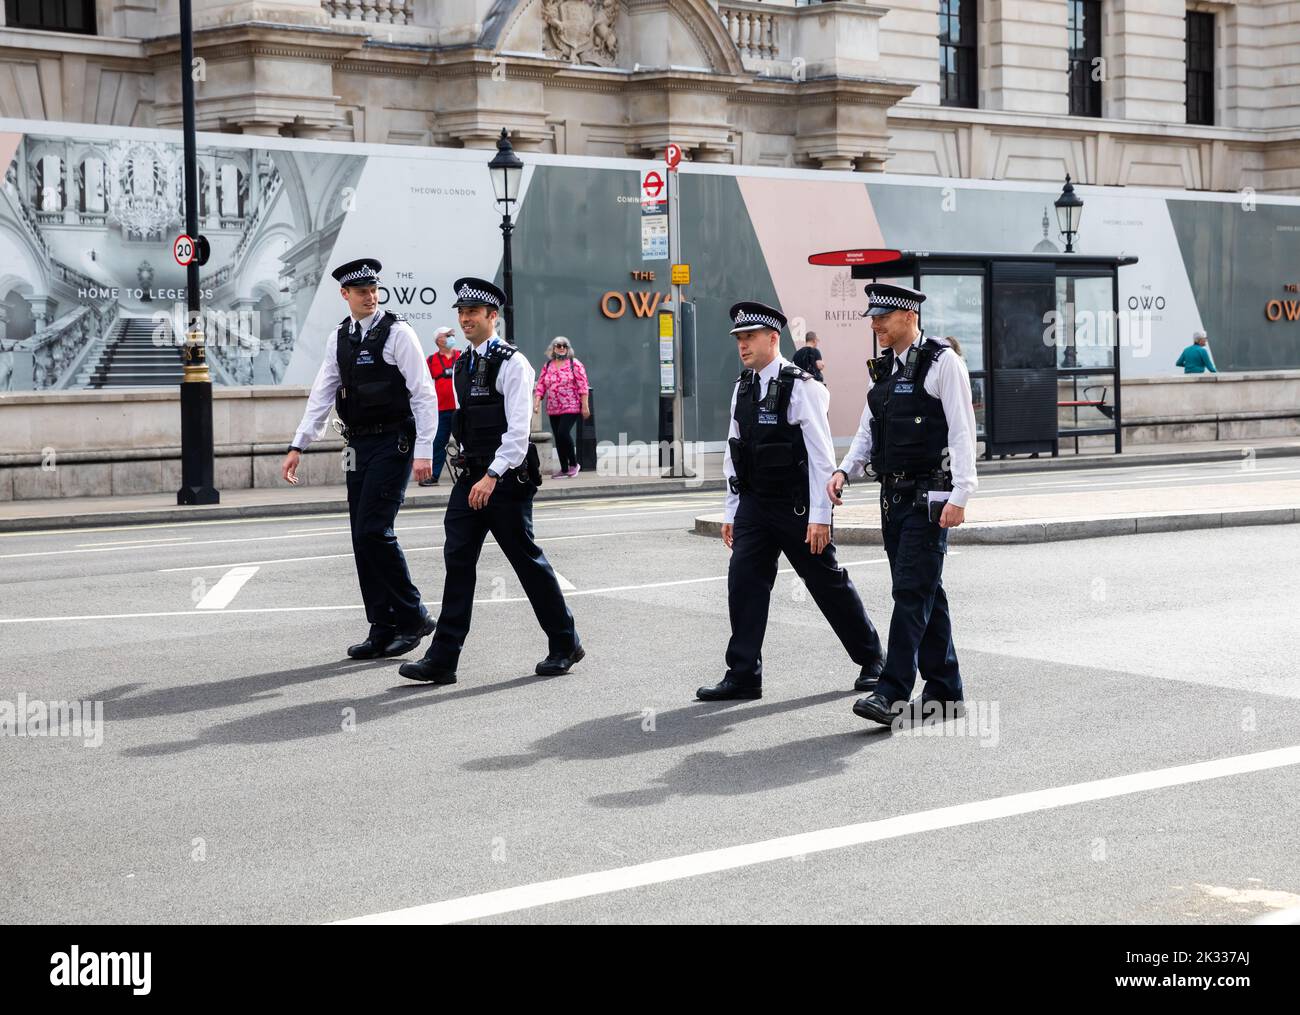 Police Officers on duty in London Stock Photo